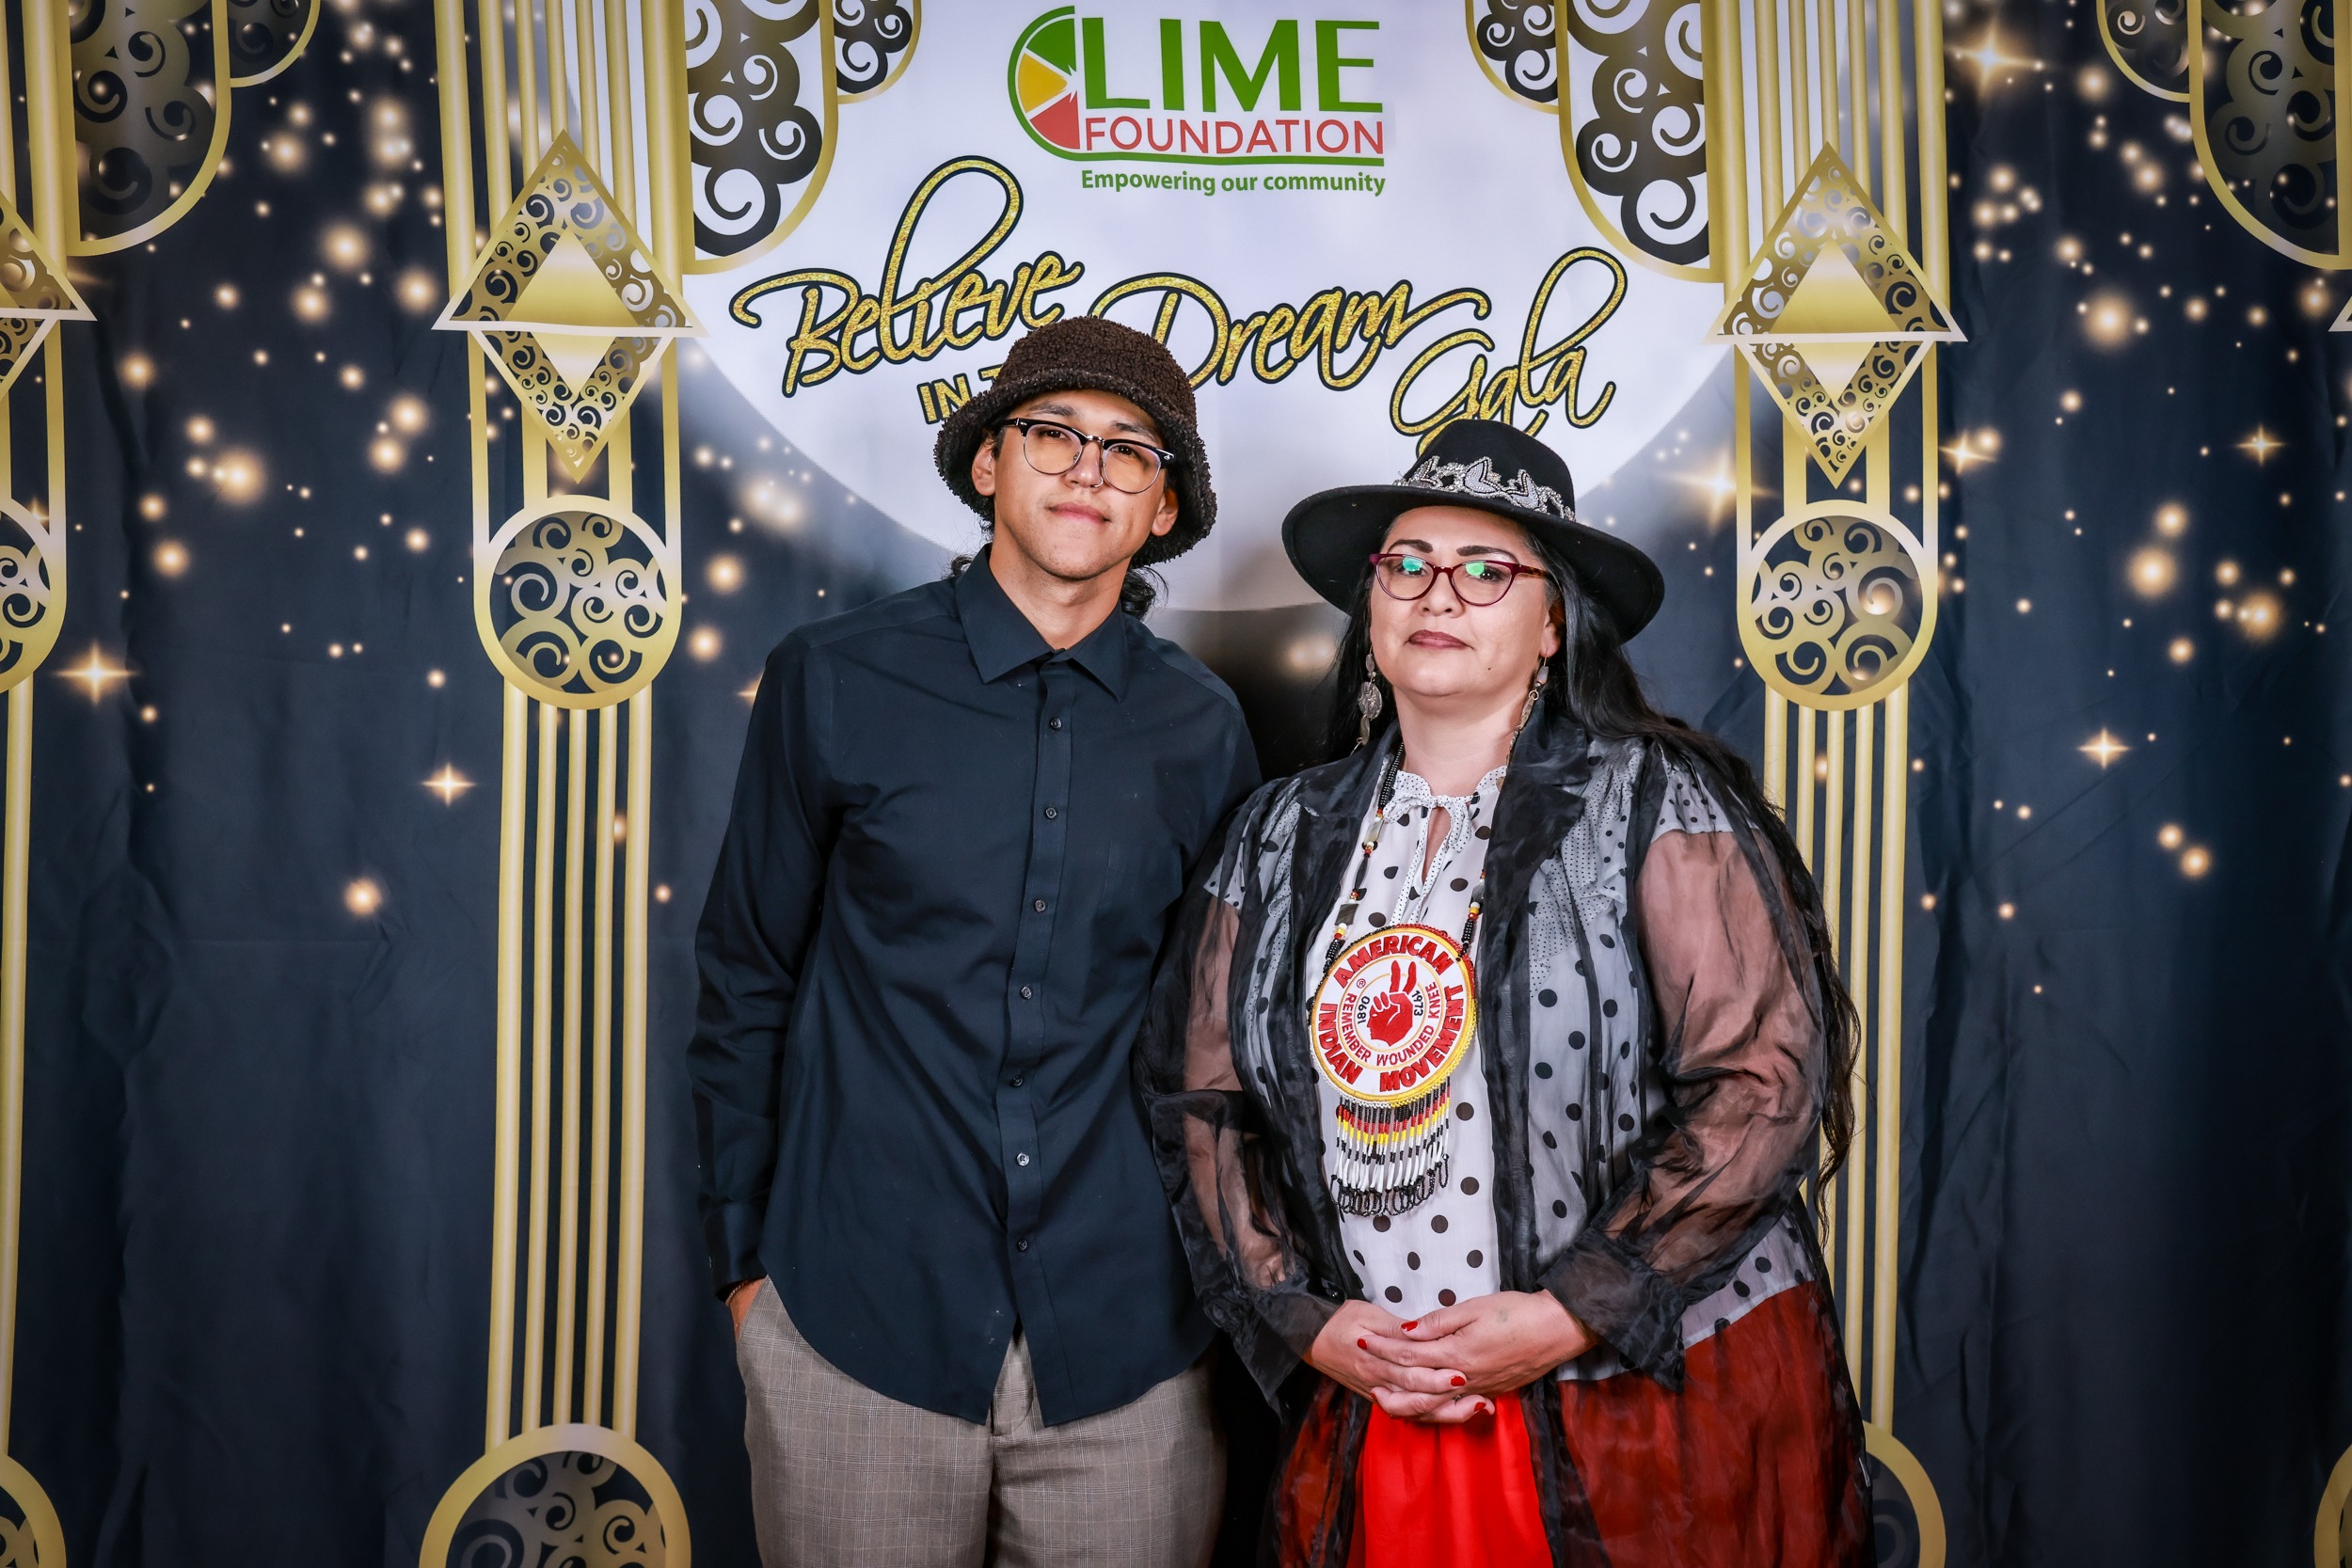 A man and woman posing in front of a photo booth at The LIME Foundation of Santa Rosa.